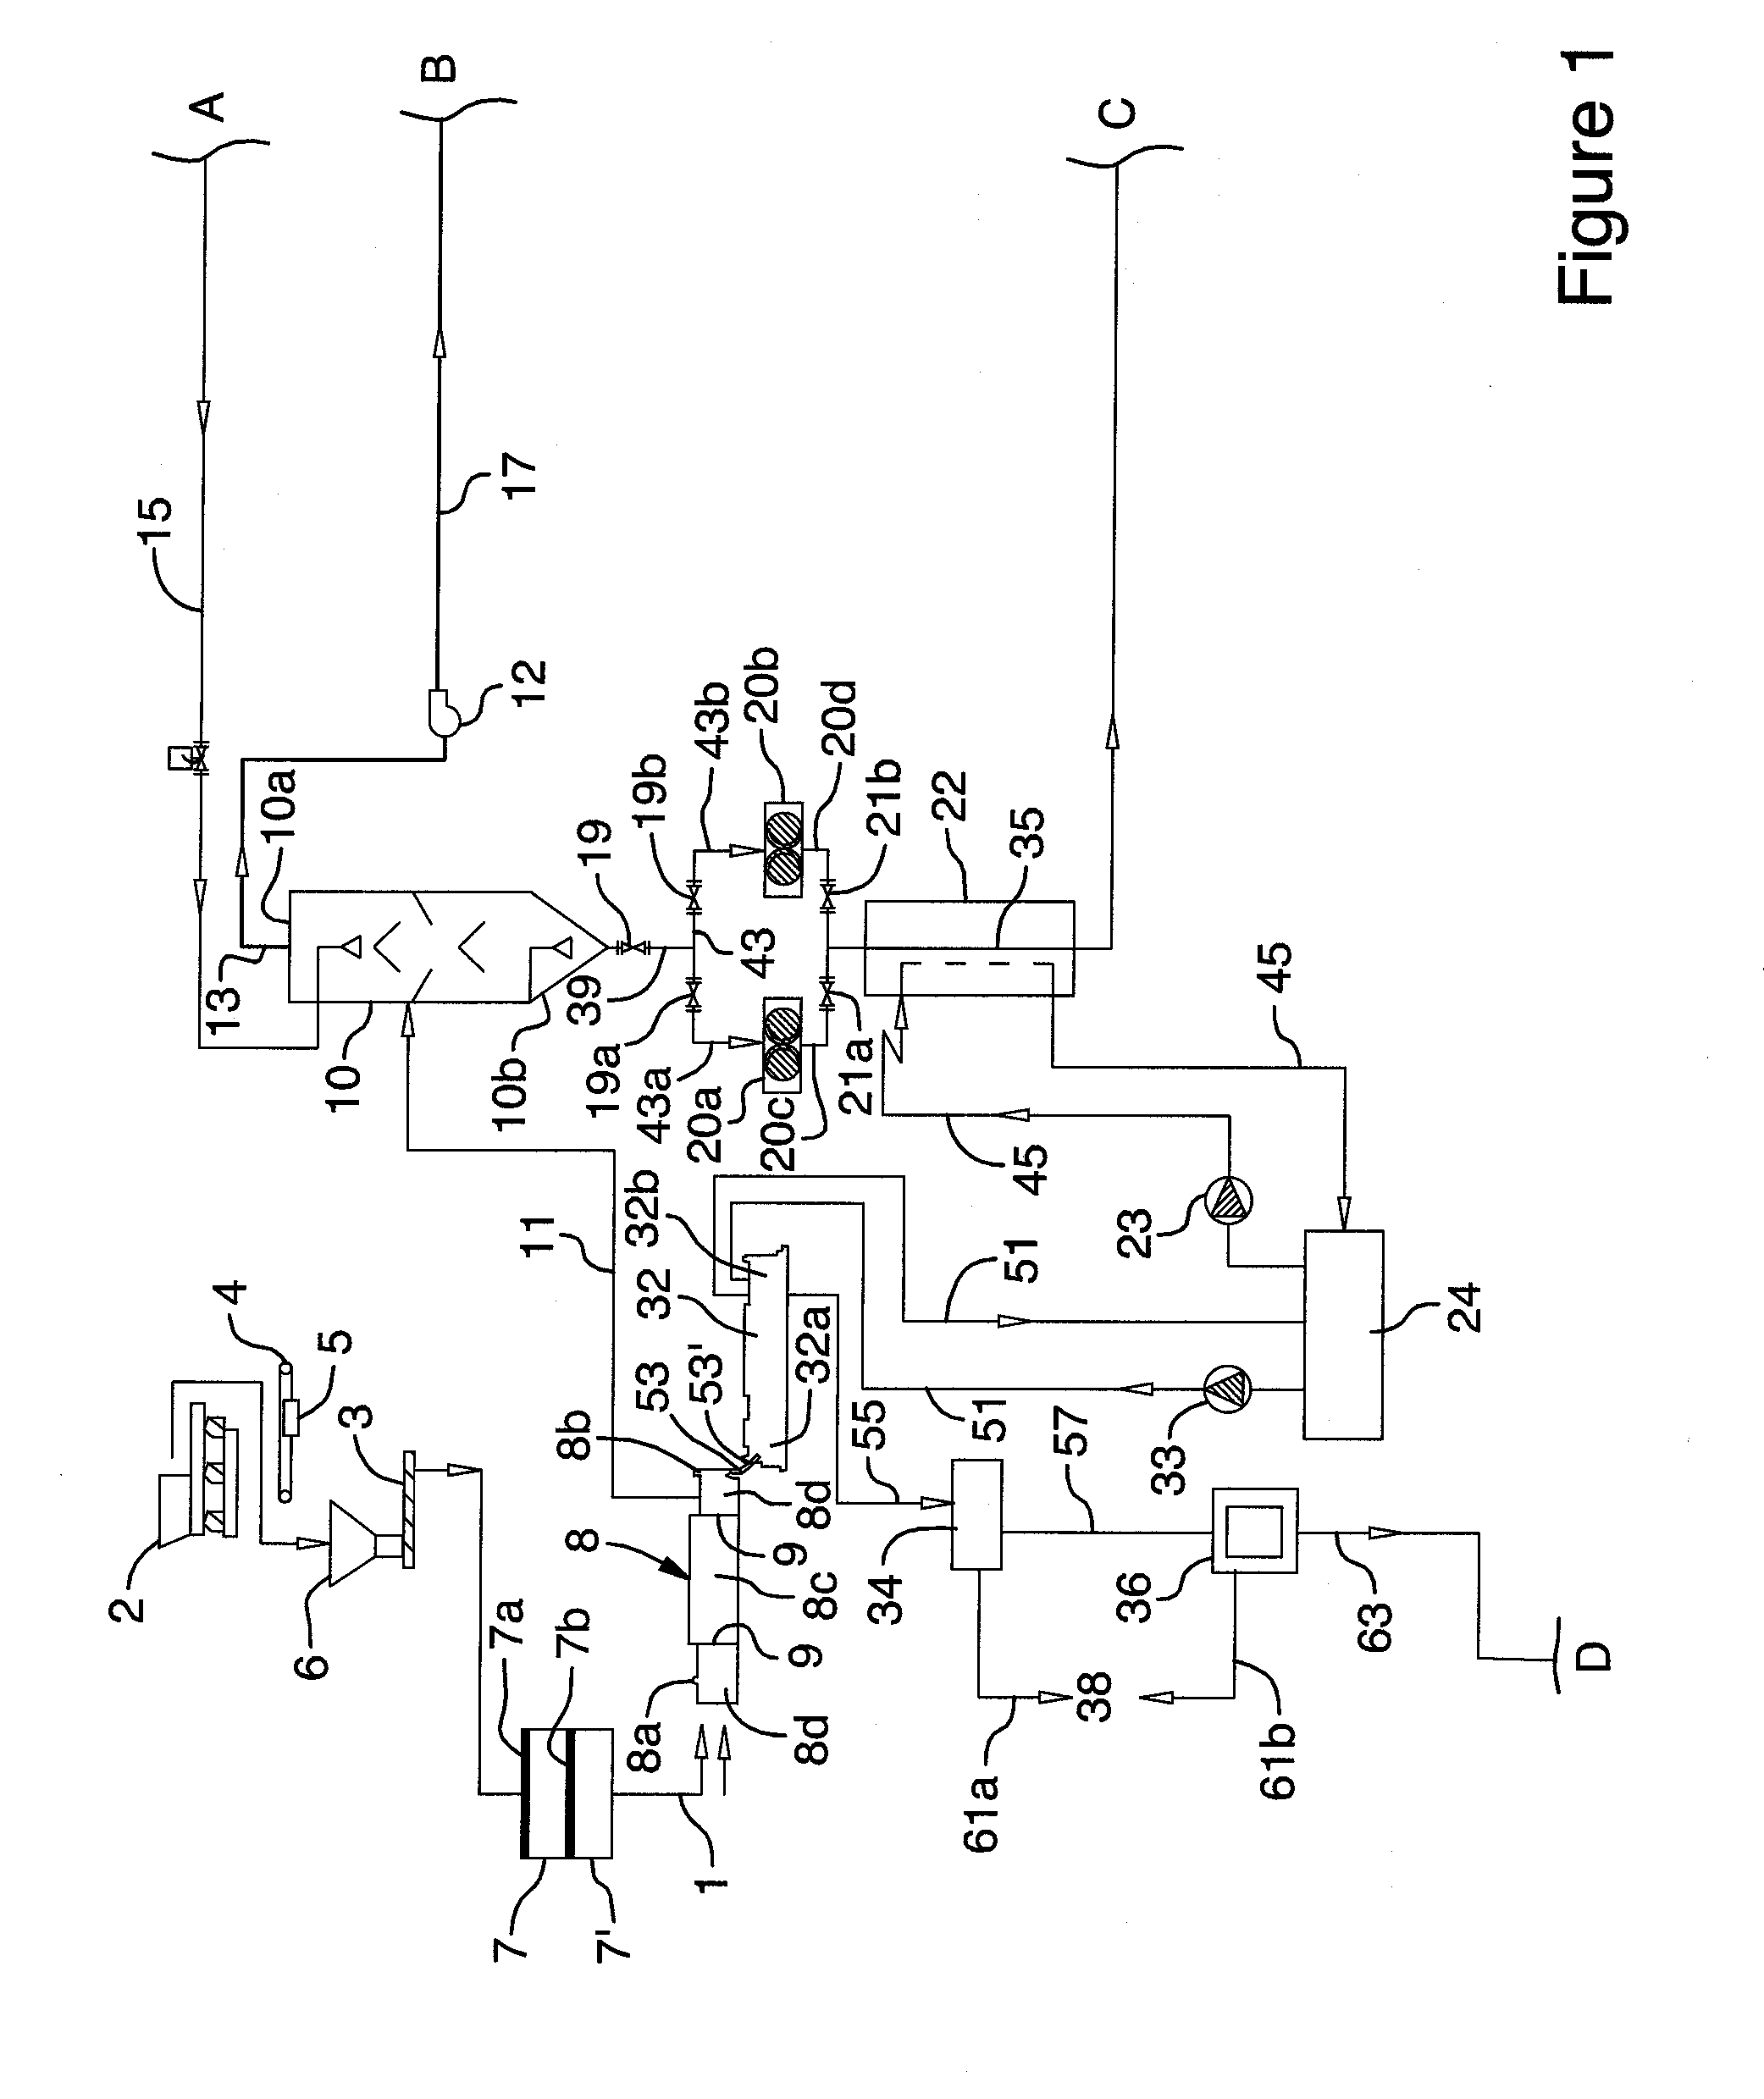 Method of Reclaiming Carbonaceous Materials From Scrap Tires and Products Derived Therefrom